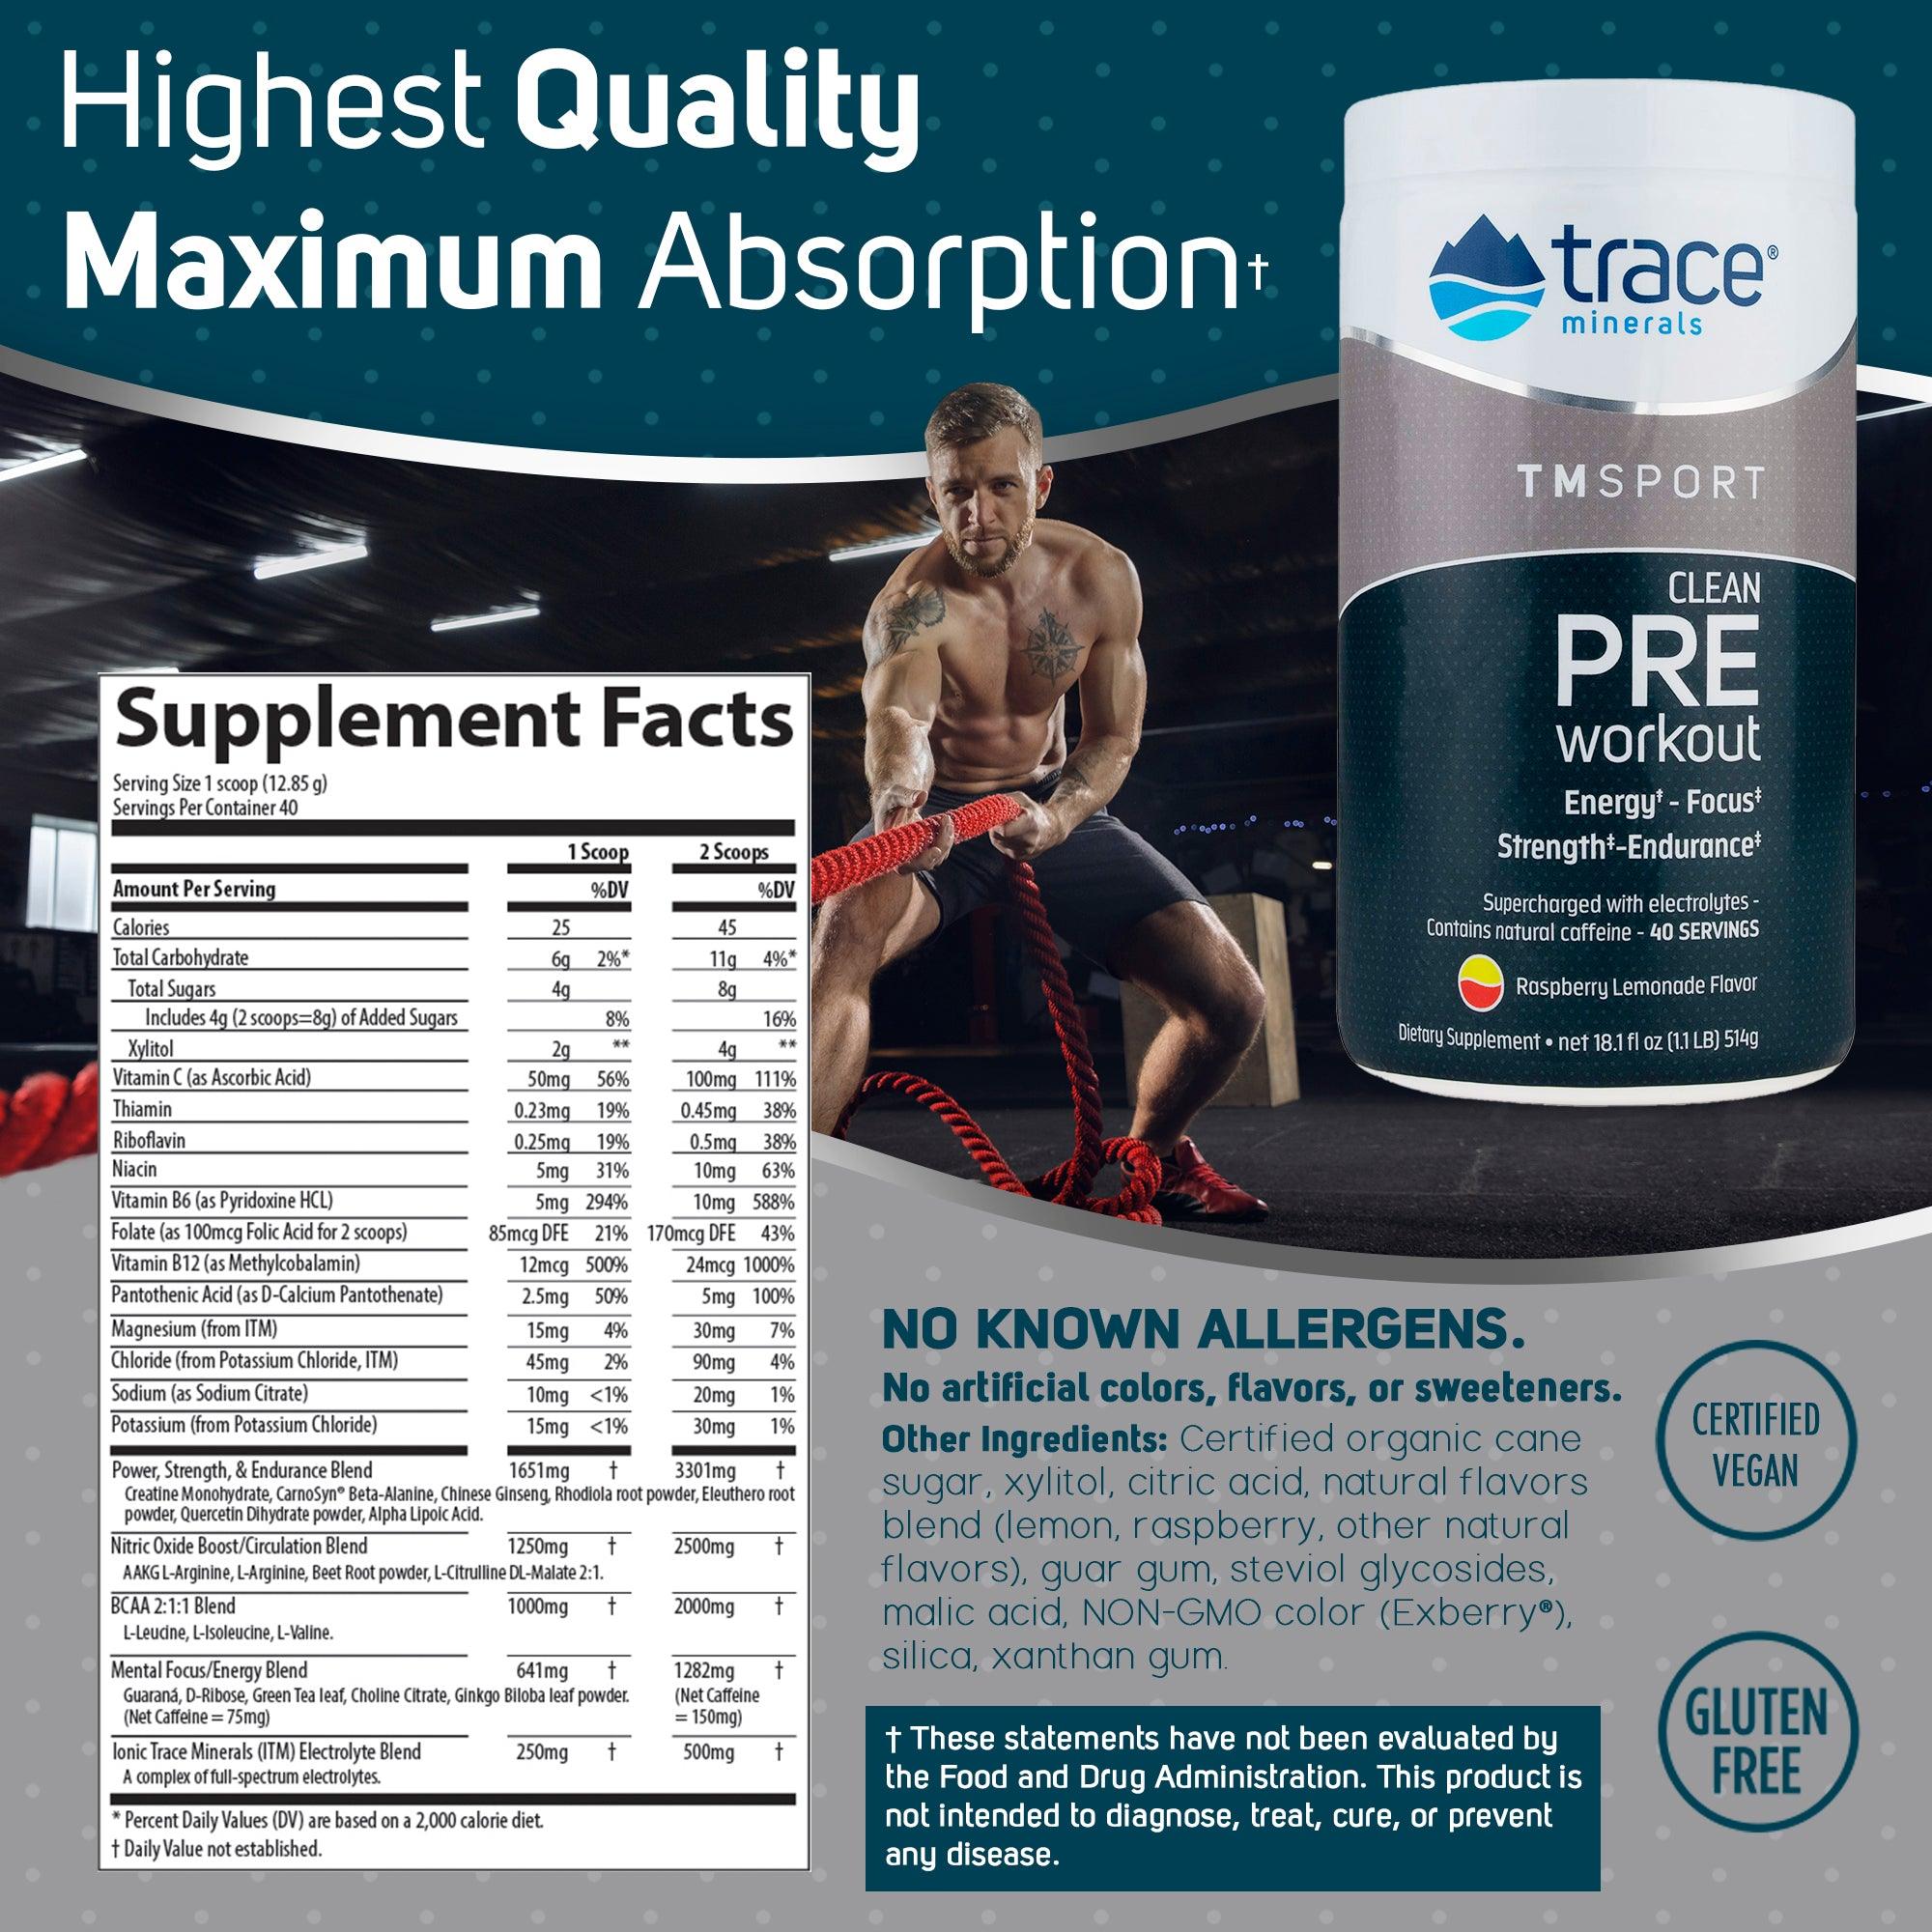 Clean Pre-Workout - Trace Minerals